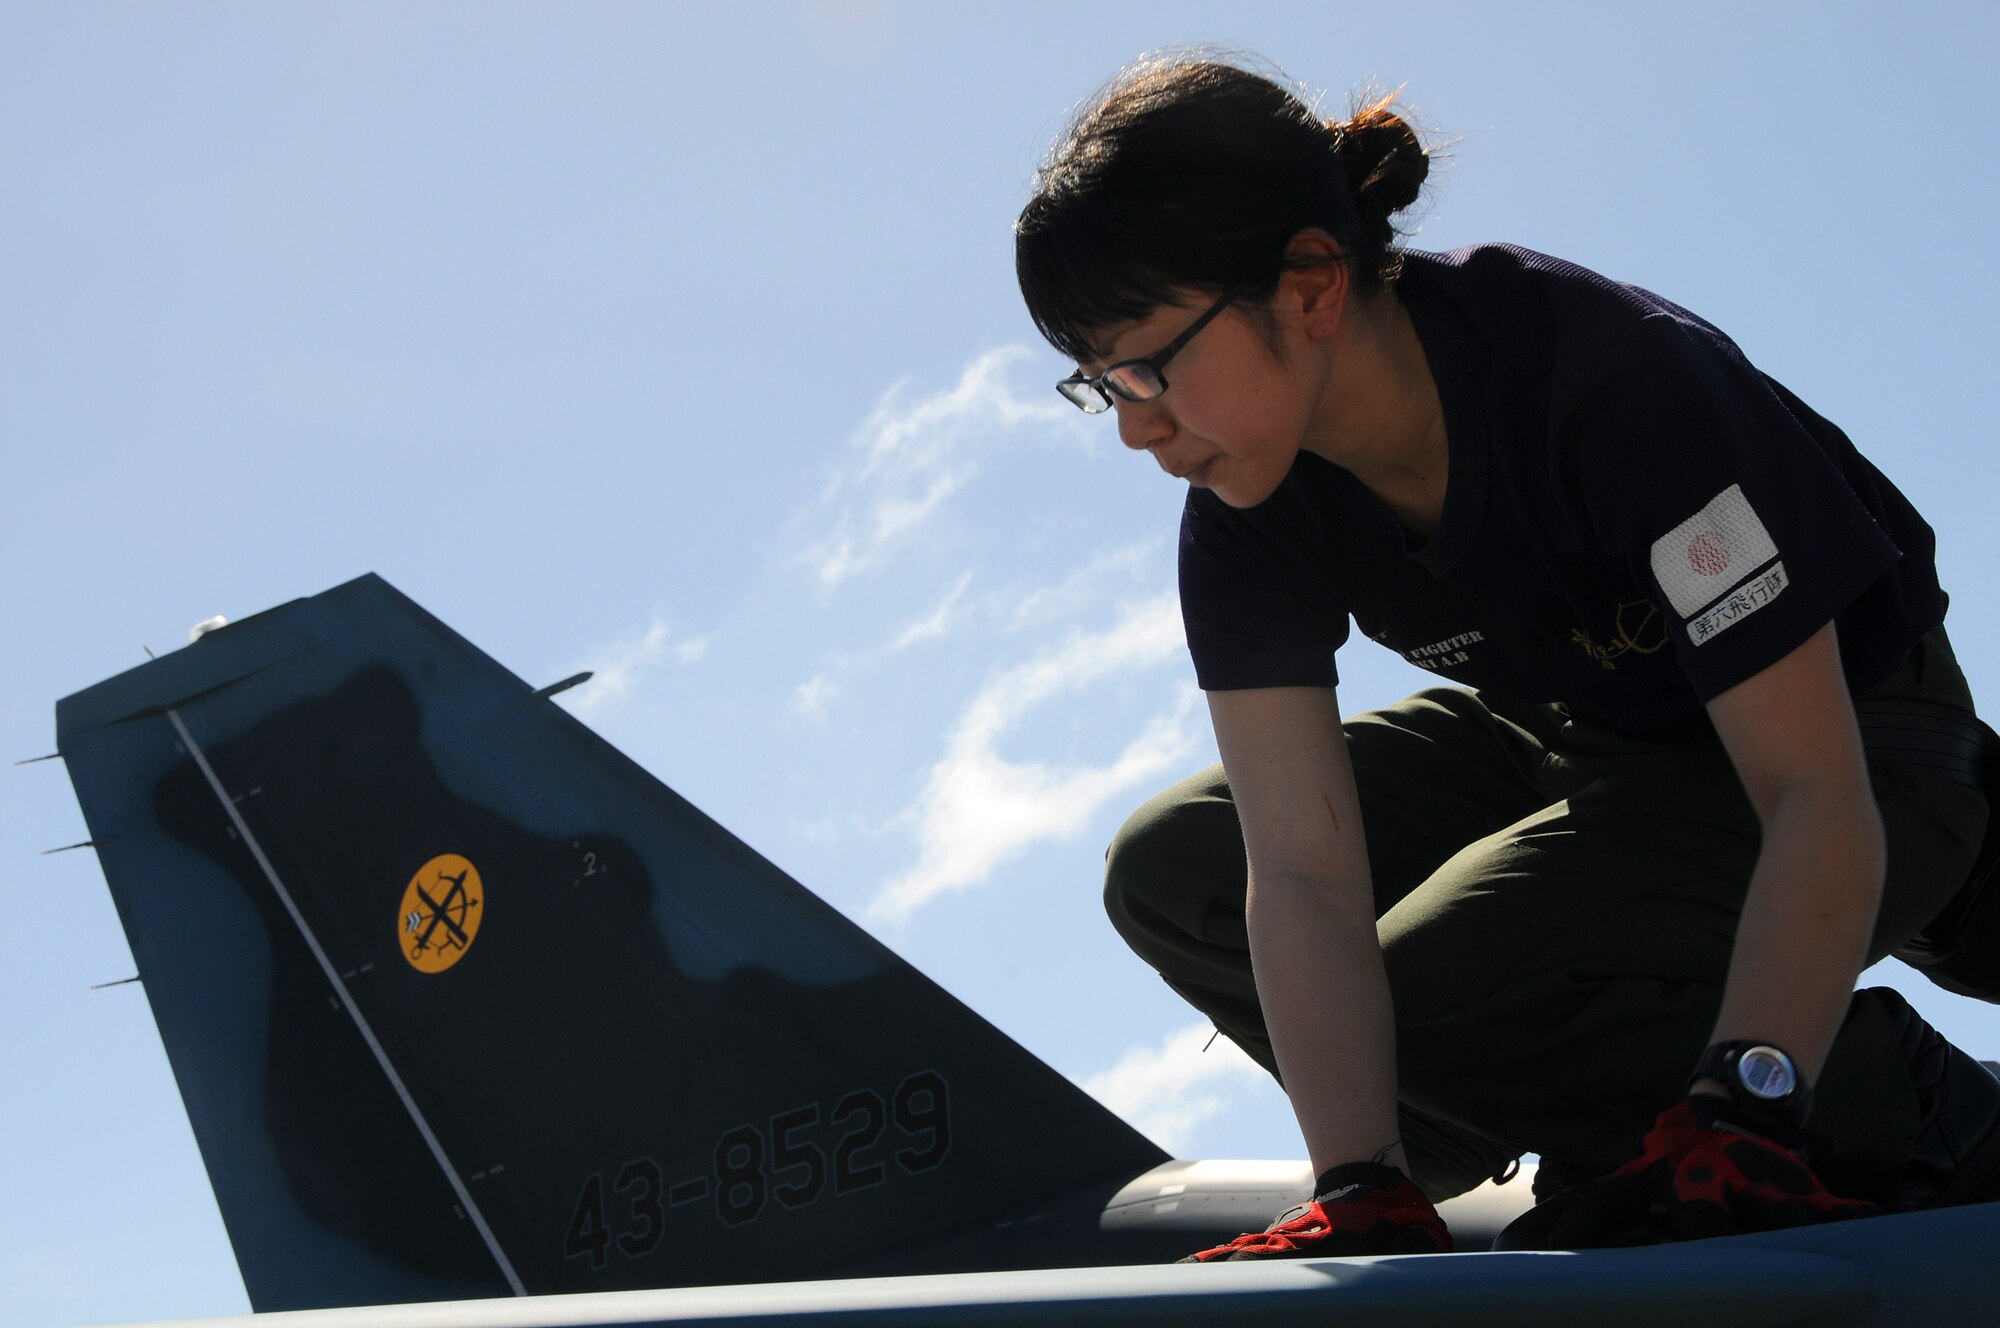 ANDERSEN AIR FORCE BASE, Guam - Japan Air Self Defense Force maintainer Staff Sgt. Teraya Miho inspects a JASDF F-2 fighter's horizontal stabilizer after its arrival at here Jan. 30 for participation in Cope North. The Cope North exercise is one of the longest-running series of exercises in the Pacific theater. Since the first Cope North exercise in 1978, thousands of American and Japanese personnel have honed skills that are vital to maintaining a high level of readiness.  (U.S. Air Force photo by Airman 1st Class Courtney Witt)